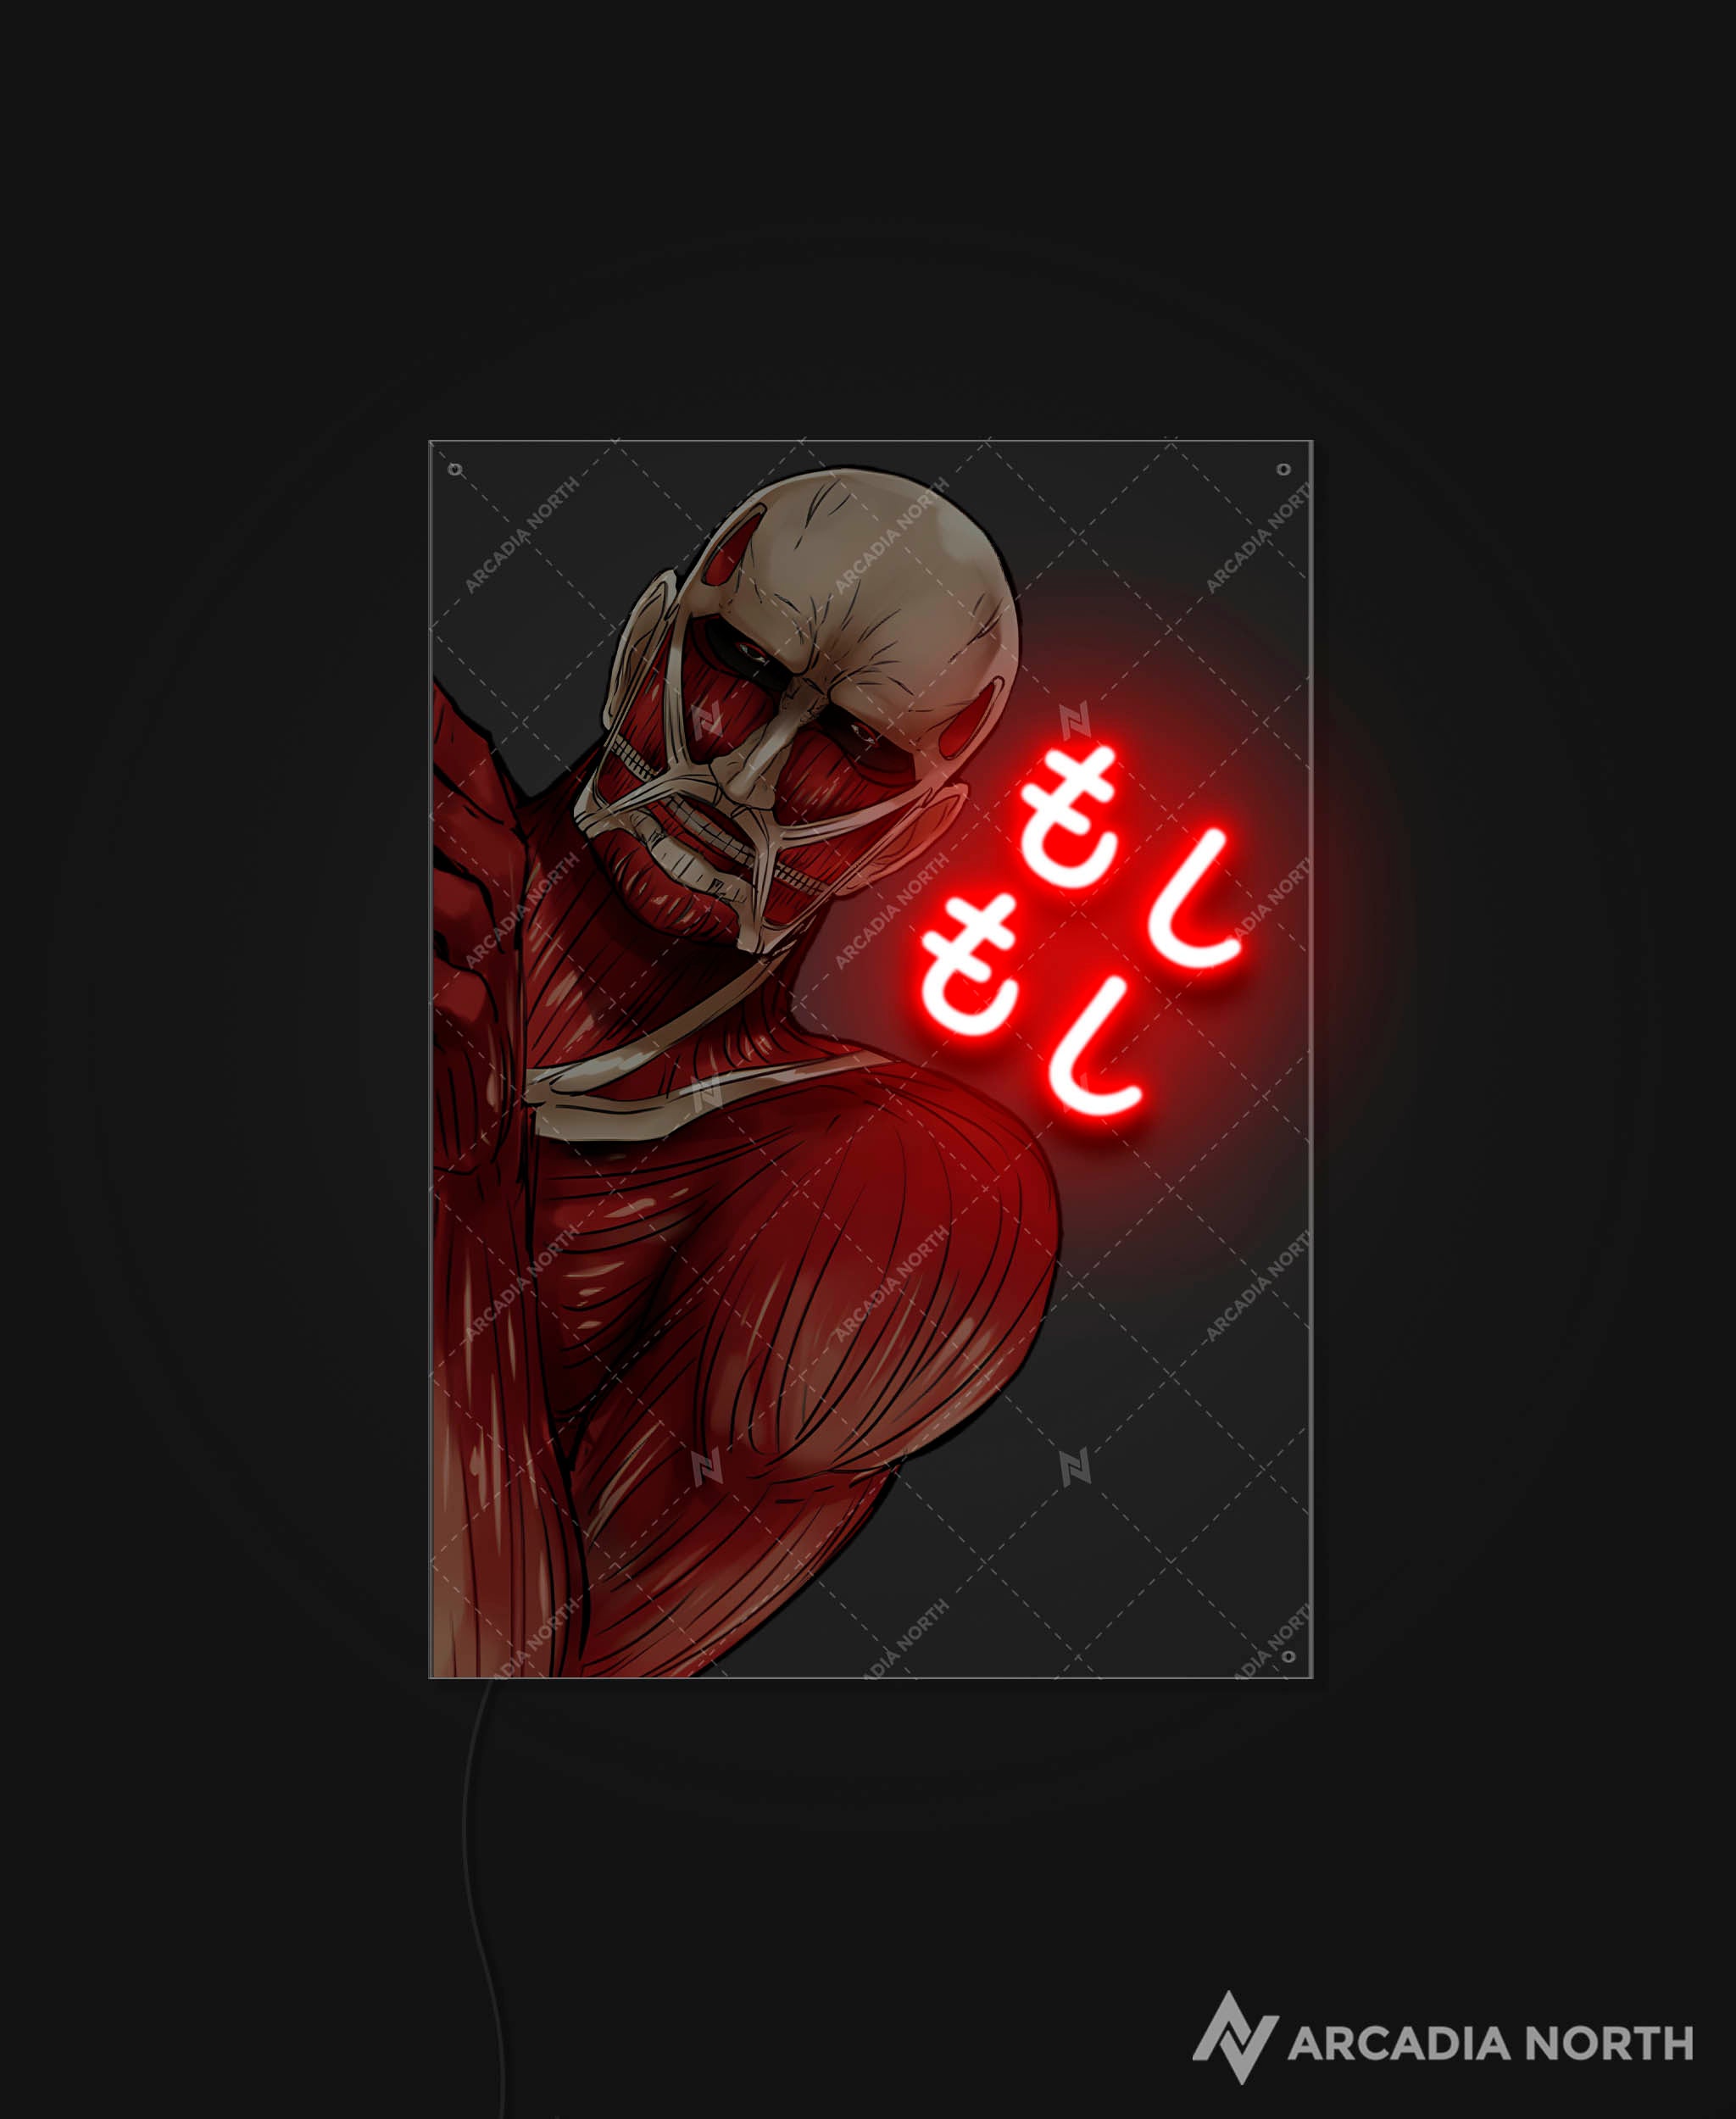 Arcadia North AURALIGHT - an LED Poster featuring the anime Attack on Titan with the moshi moshi titan desu meme written in Japanese Kana and illuminated by glowing neon LED lights. UV-printed on acrylic.